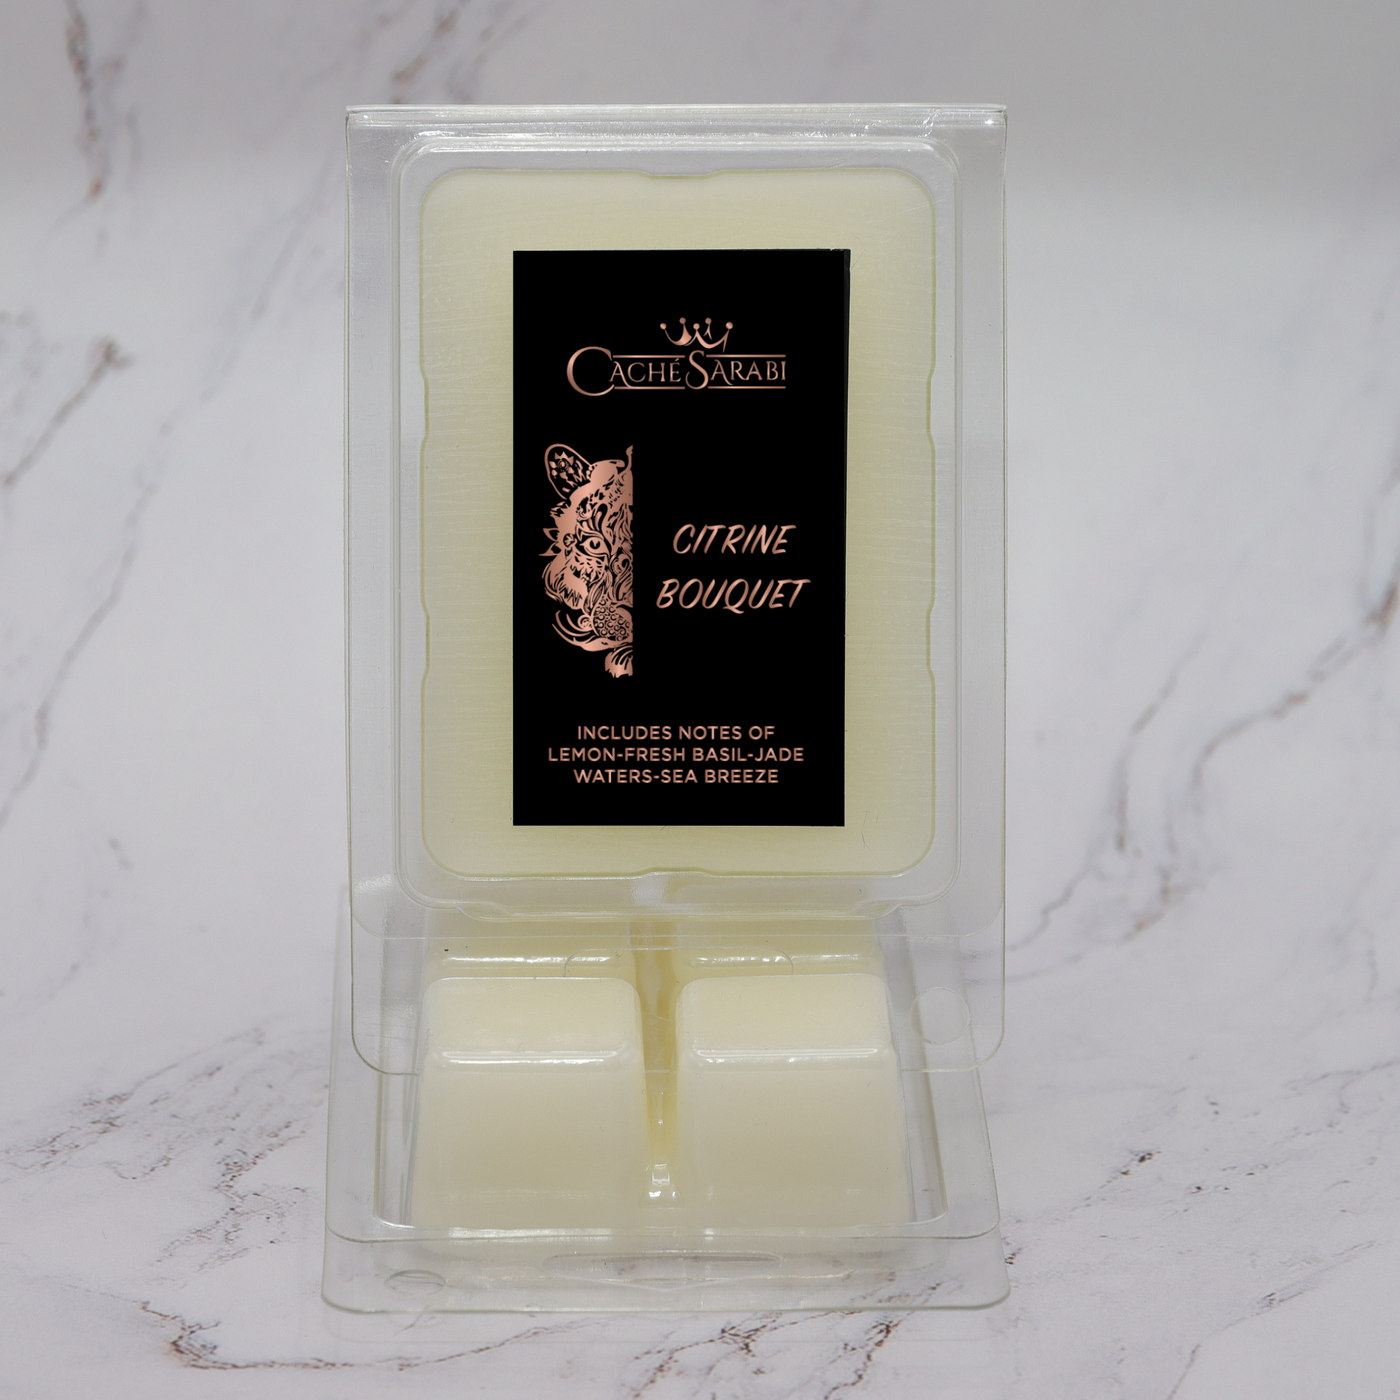 Our Citrine Bouquet Wax Melts offer a safe and effortless way to add a hint of fragrance to your space